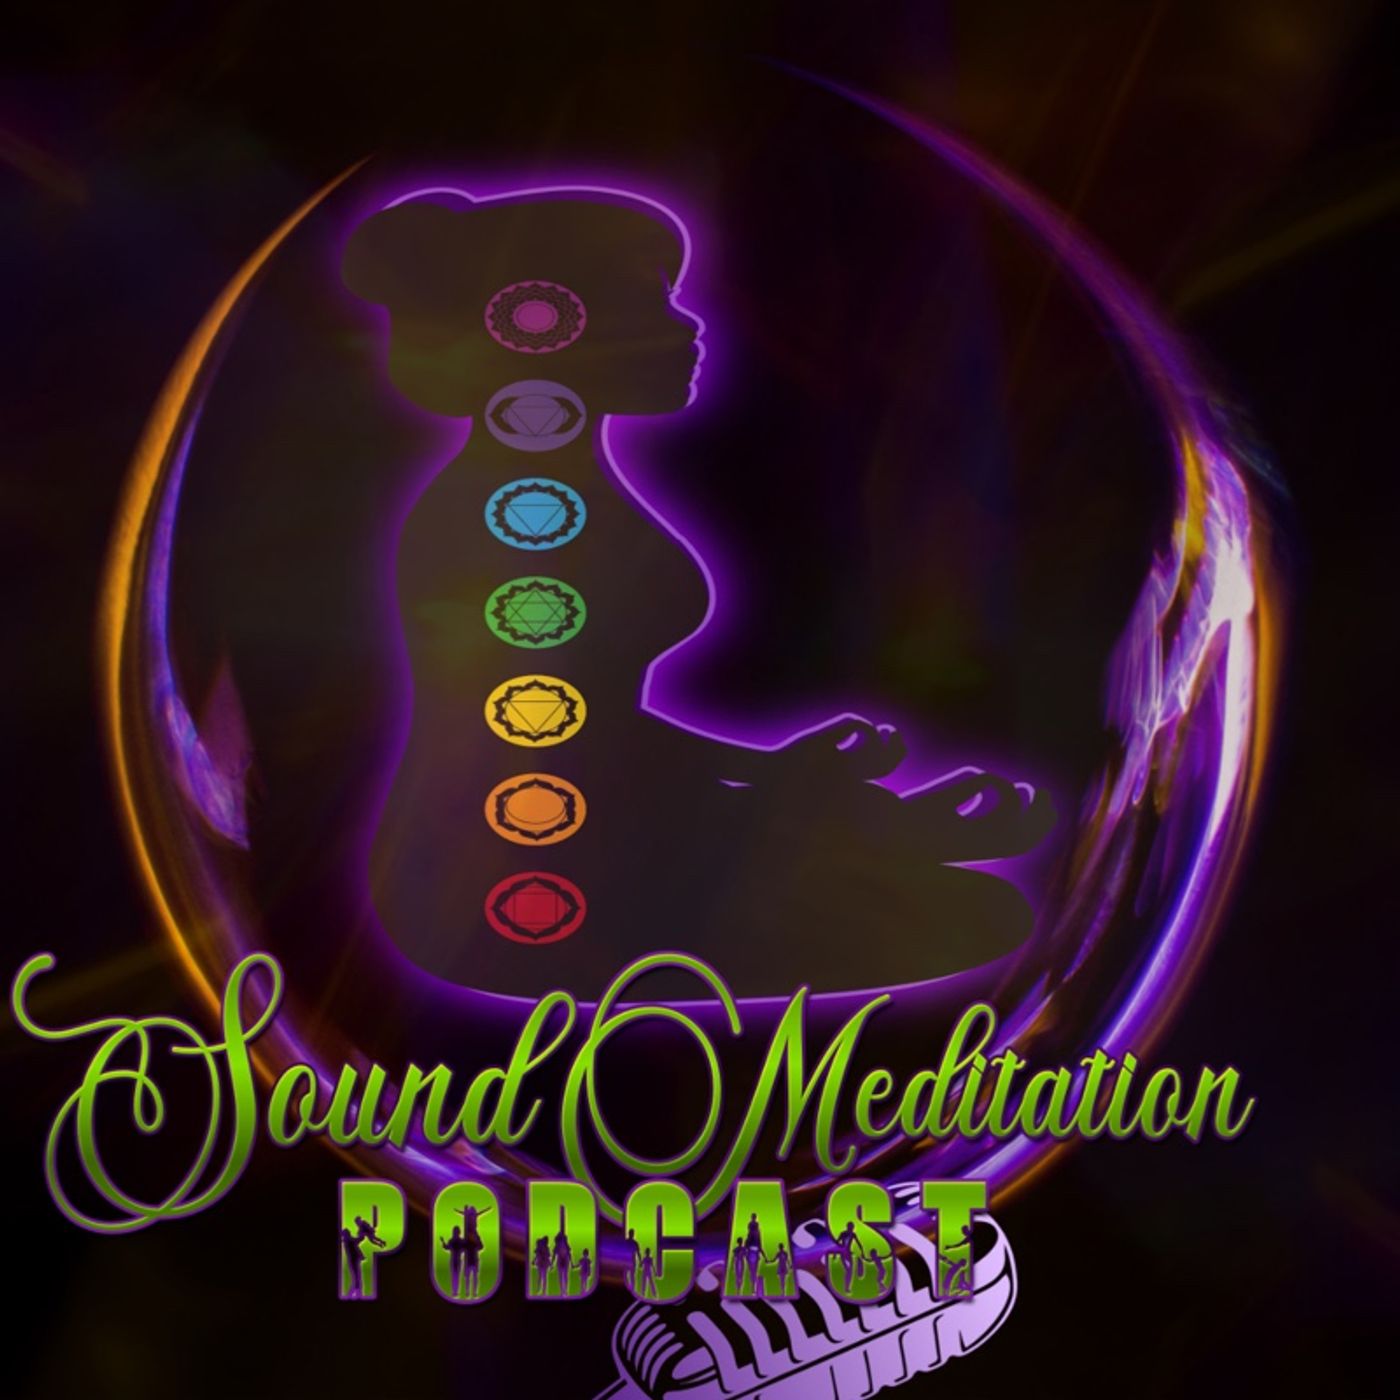 Meditation Bite Sounds - Gong Soundscape - Made with Calliope